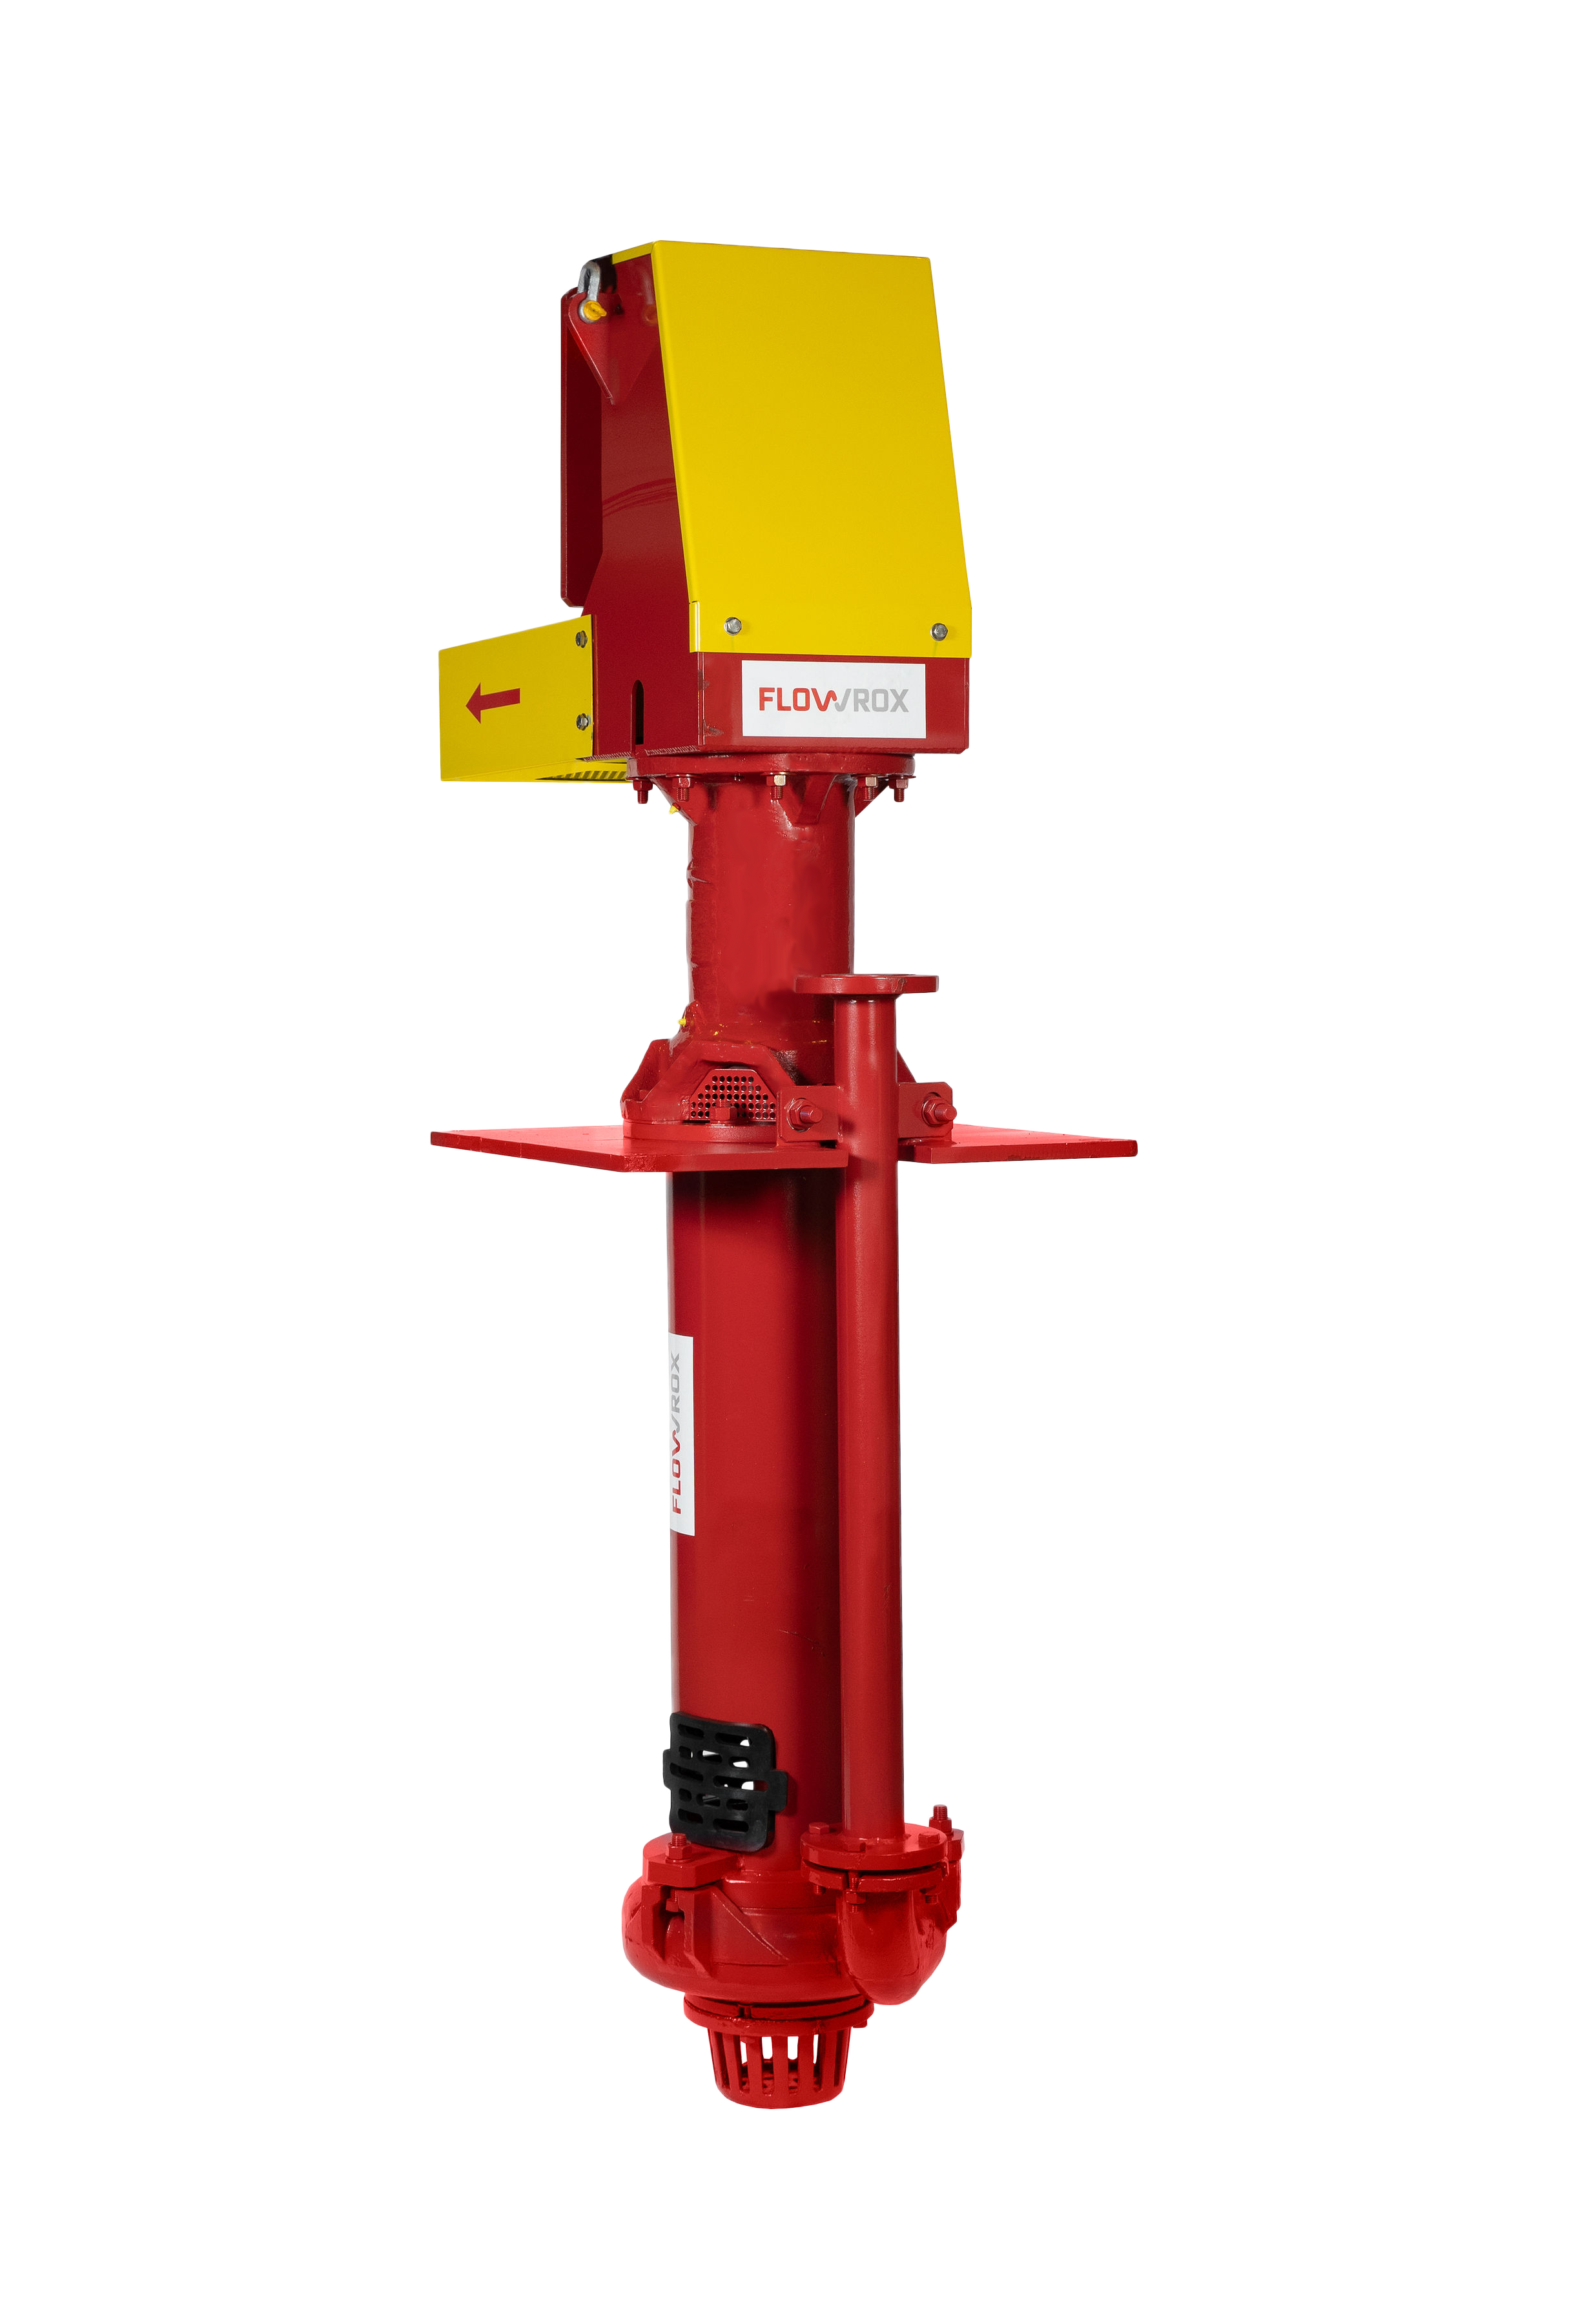 Flowrox’s new CF-V centrifugal pump with a vertical cantilever design is for use in mining and minerals processing.